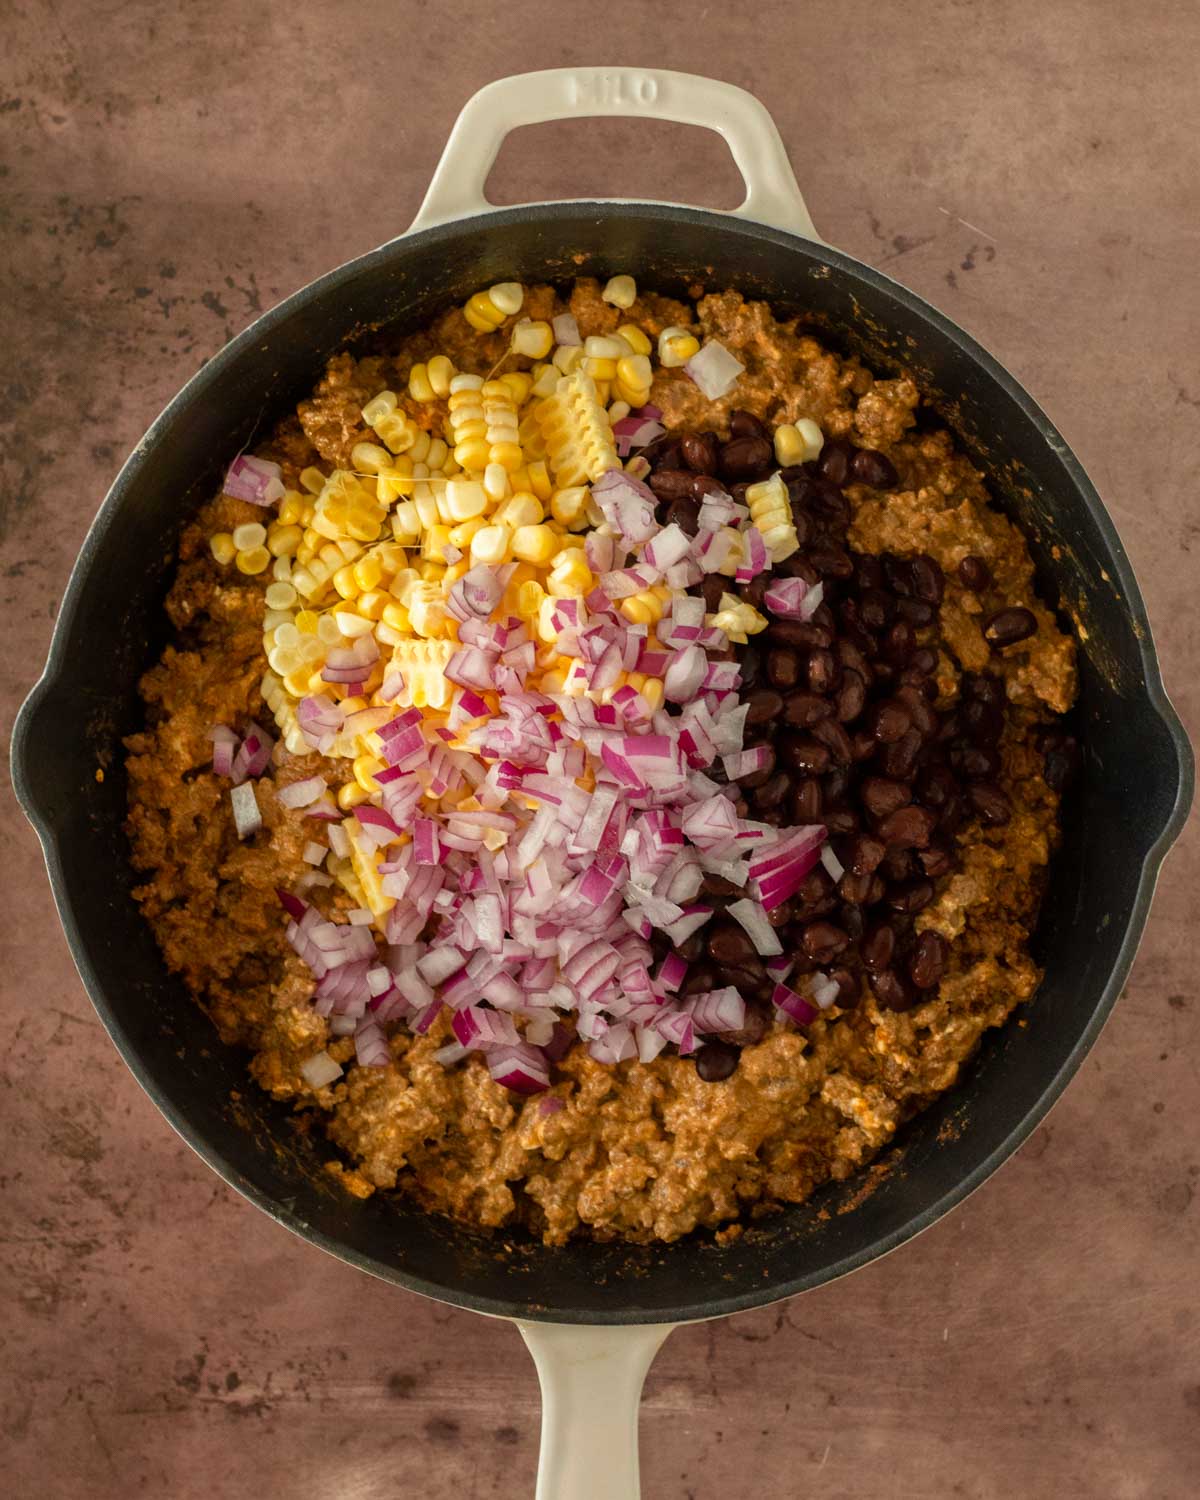 Step 3. Add the beans, corn and red onion to the skillet